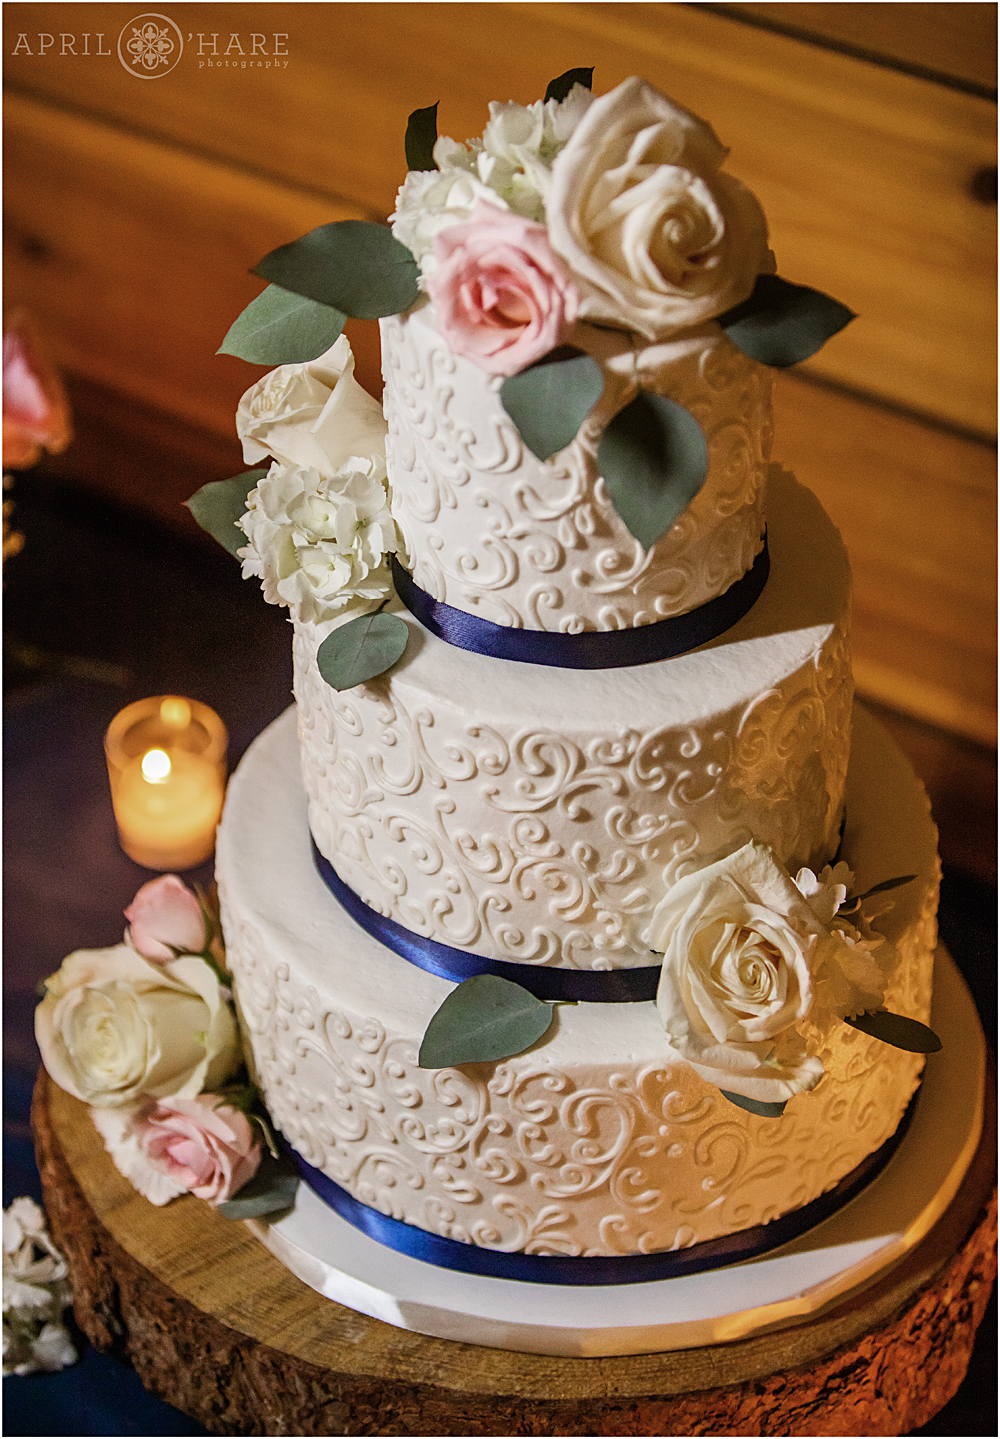 Three tiered white wedding cake with pink roses from Kelly Kakes